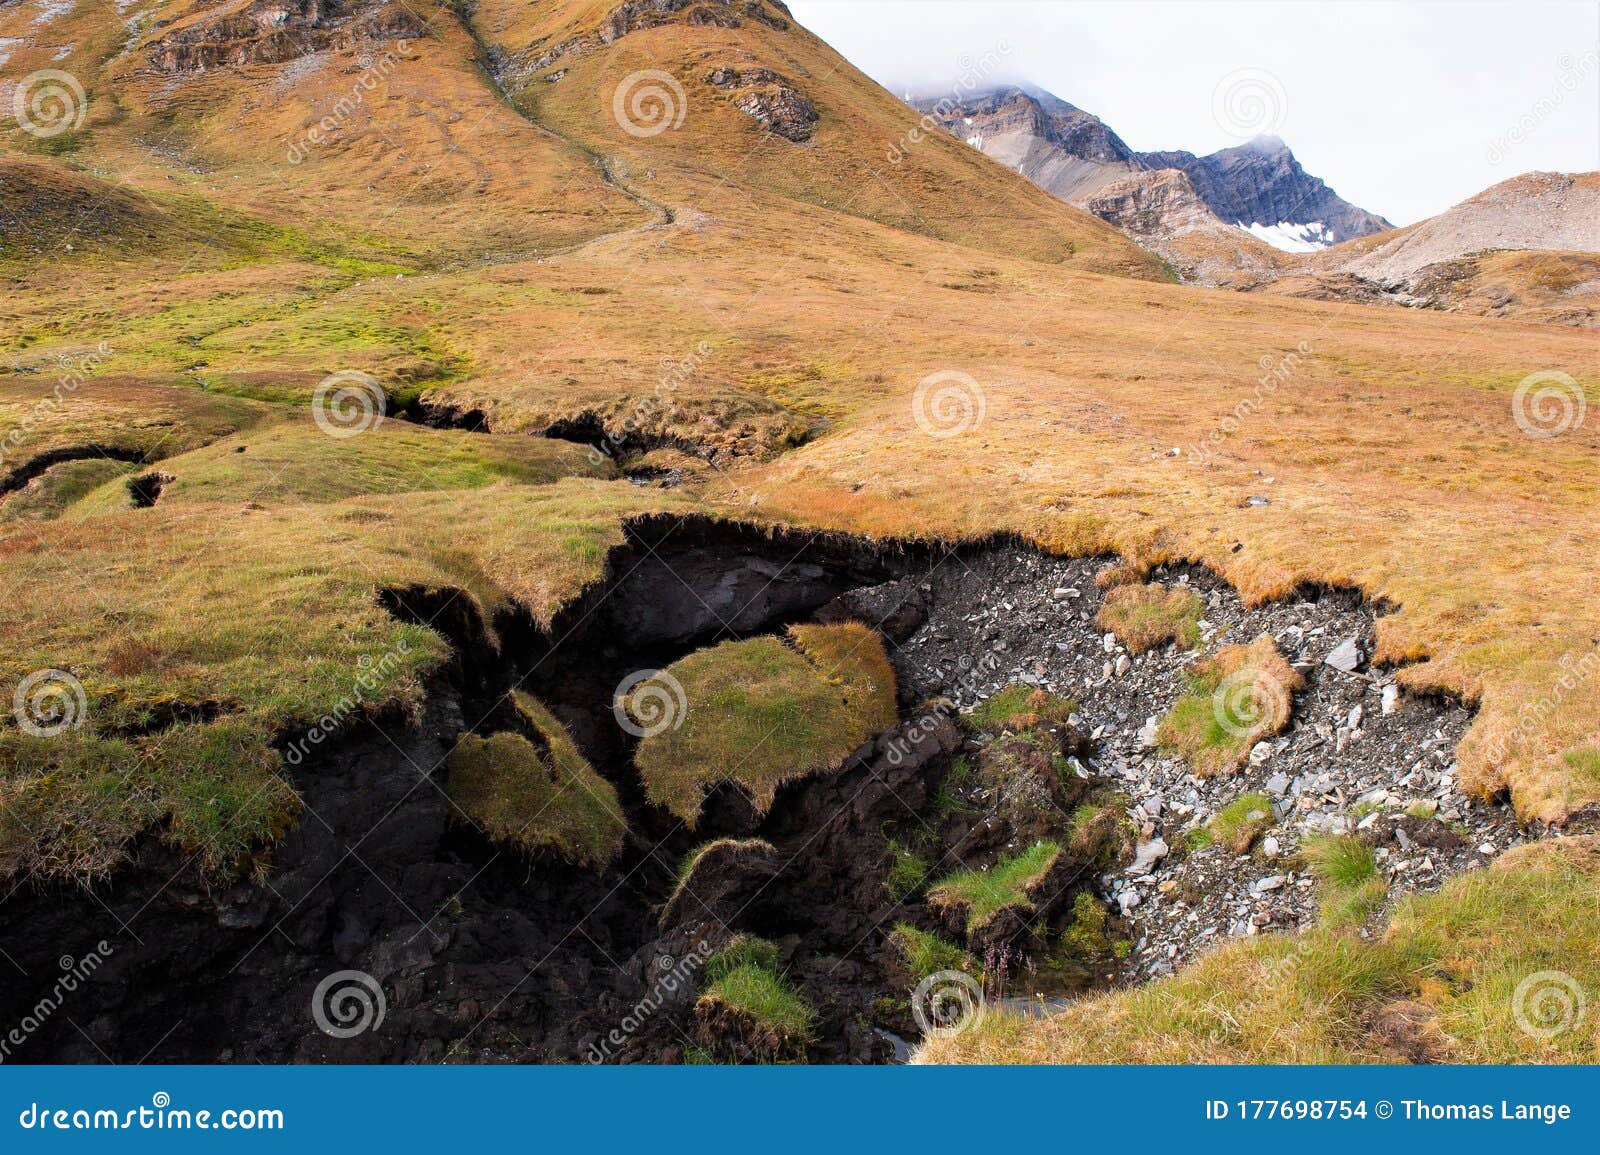 tundra landscape - erosion, caused by thawing permafrost ground, one of several results of the global warming